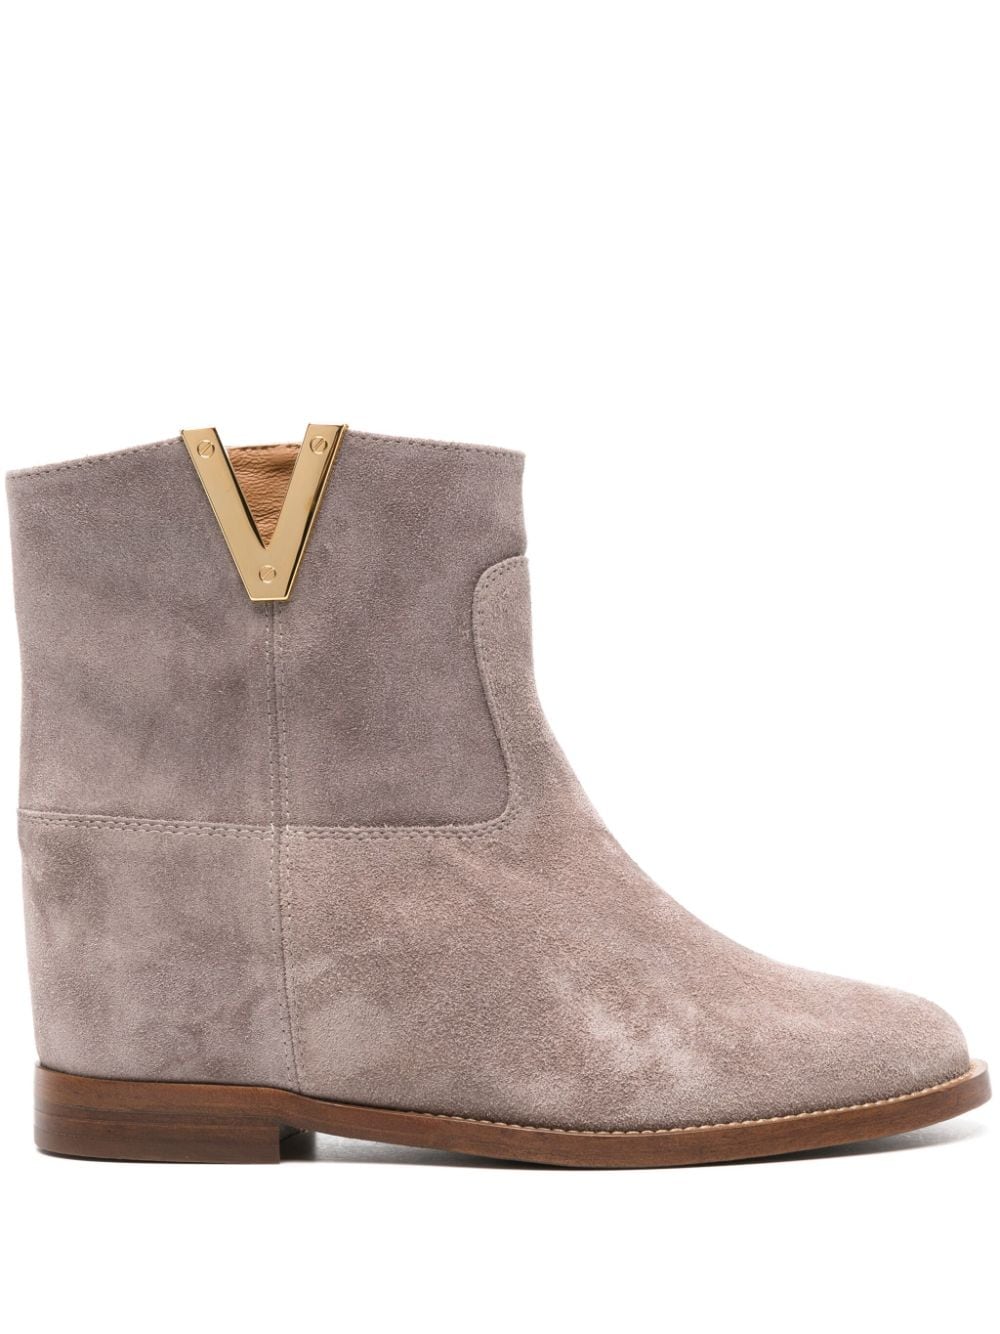 Via Roma 15 Stivale suede ankle boots - Nude